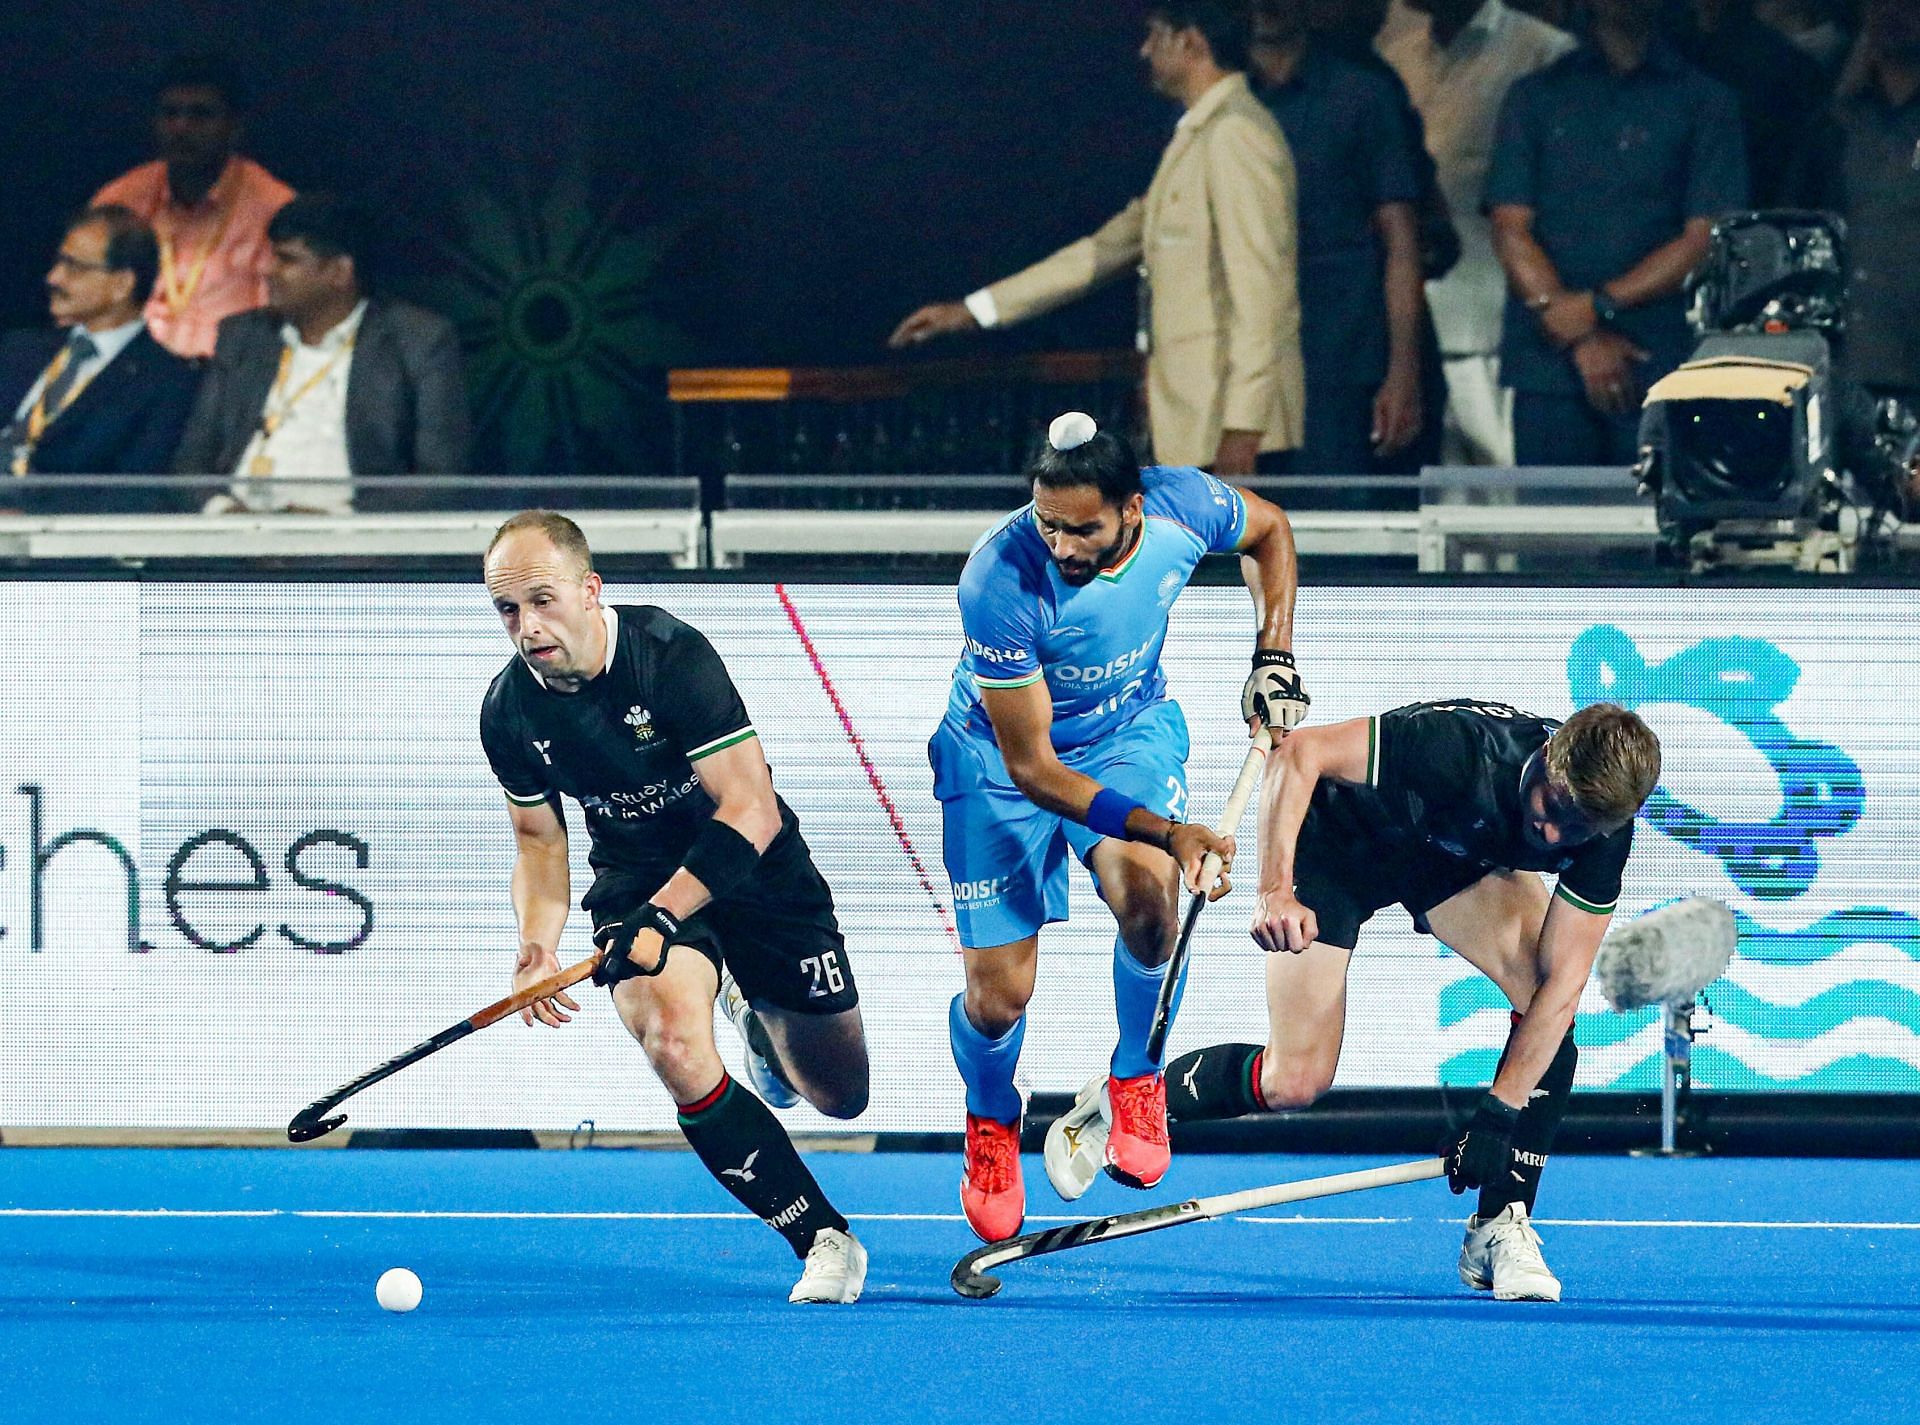 Akashdeep Singh was the star for India in this Hockey World Cup match